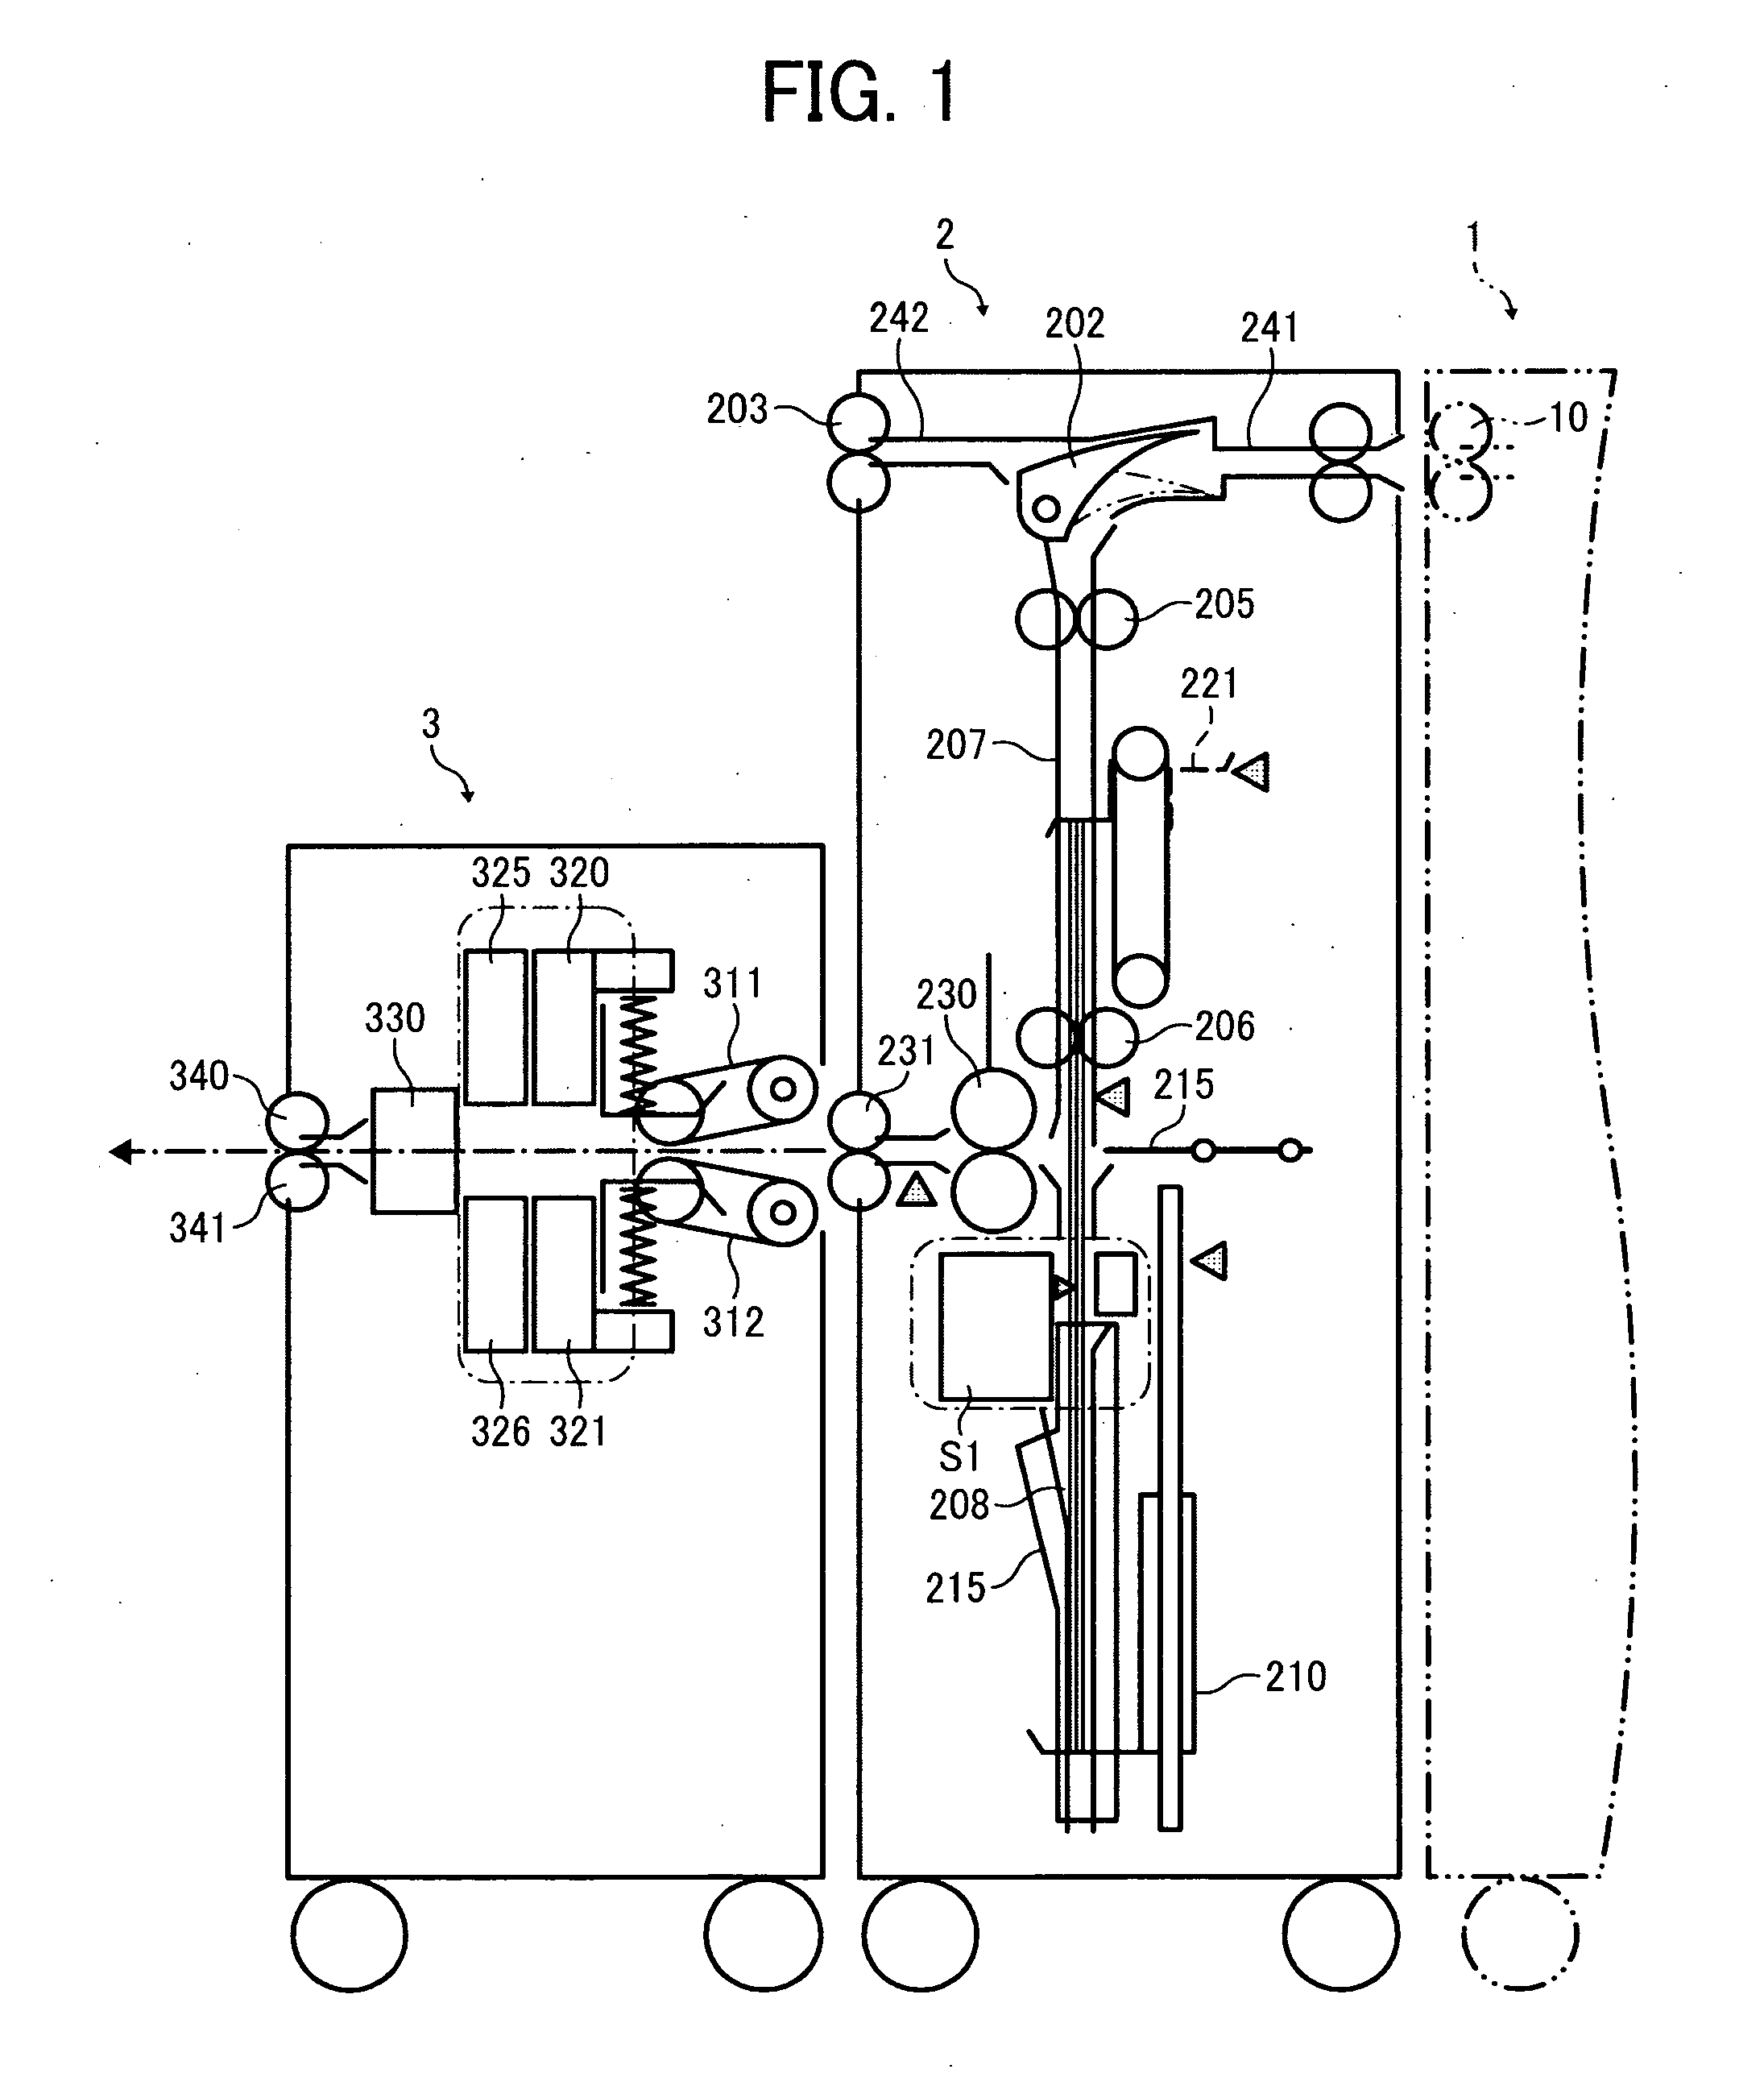 Spine formation device, bookbinding system, and spine formation method